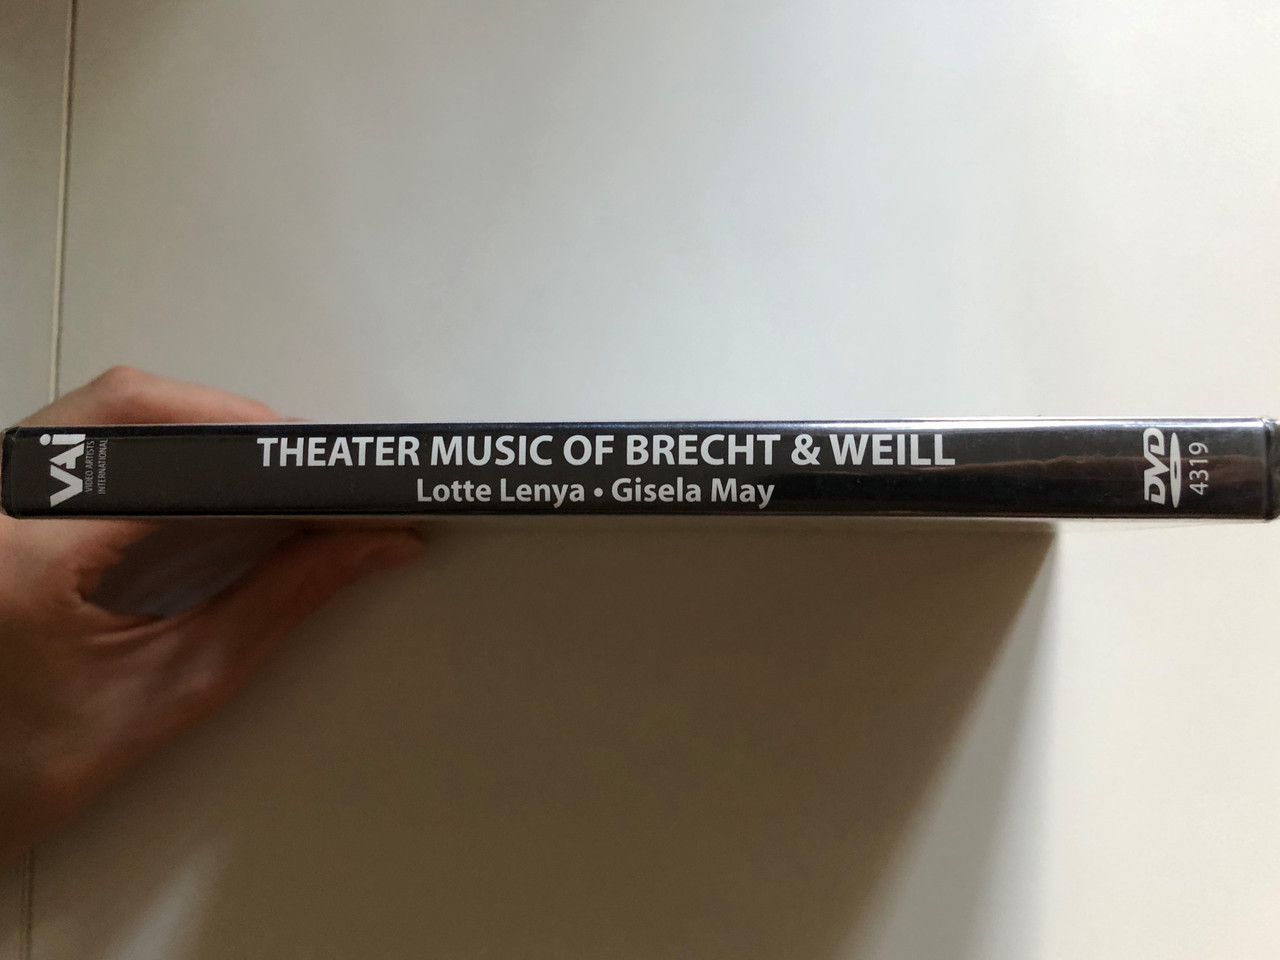 Lotte_Lenya_and_Gisela_May_-_Theater_Songs_of_Brecht_and_Weill_Theater_Music_of_Brecht_and_Weill_Including_performances_by_Martha_Schlamme_and_Will_Holt_Packaging_design_and_1__69381.1691835113.1280.1280.JPG (1280×960)